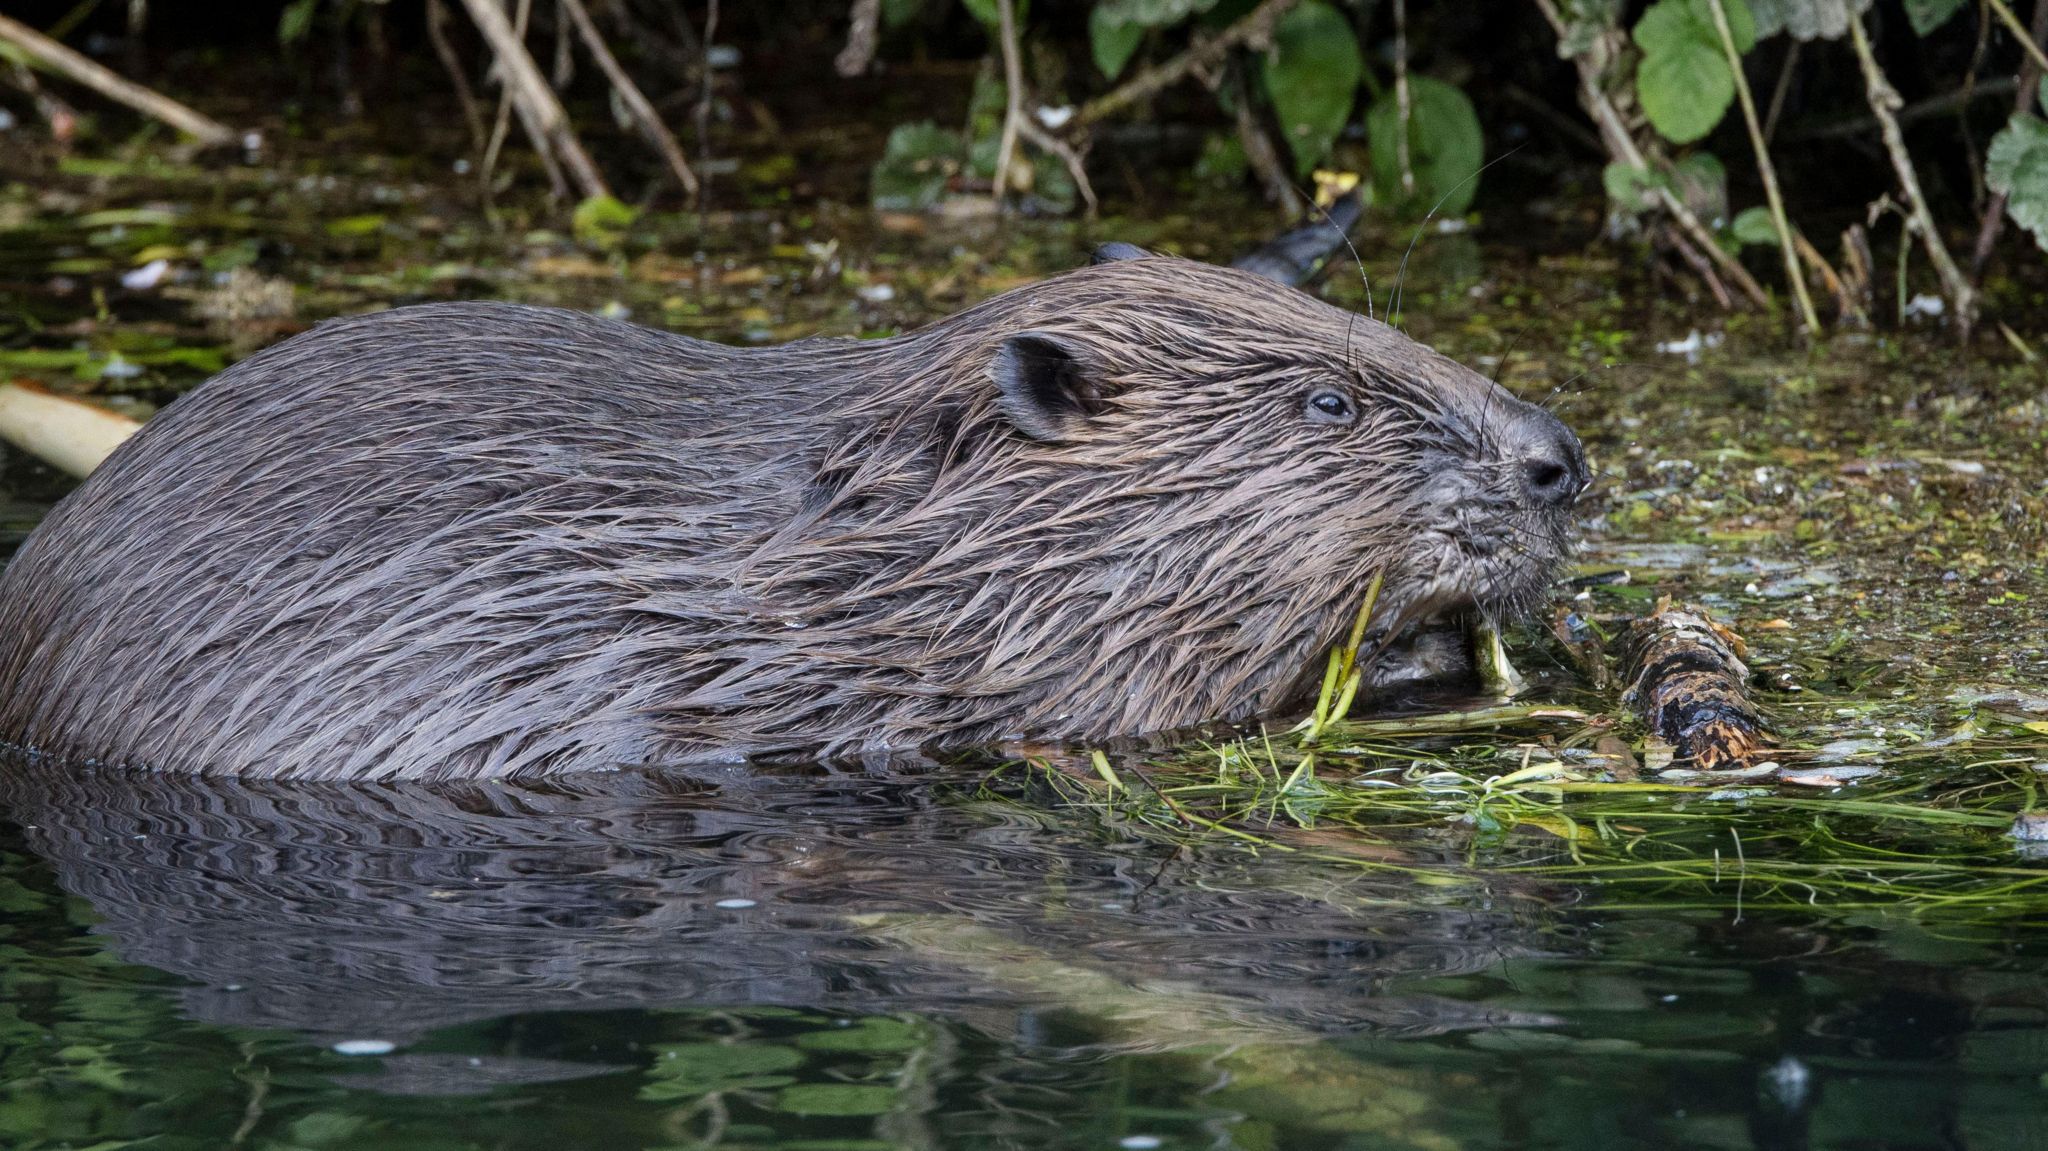 A close-up of a beaver in the river